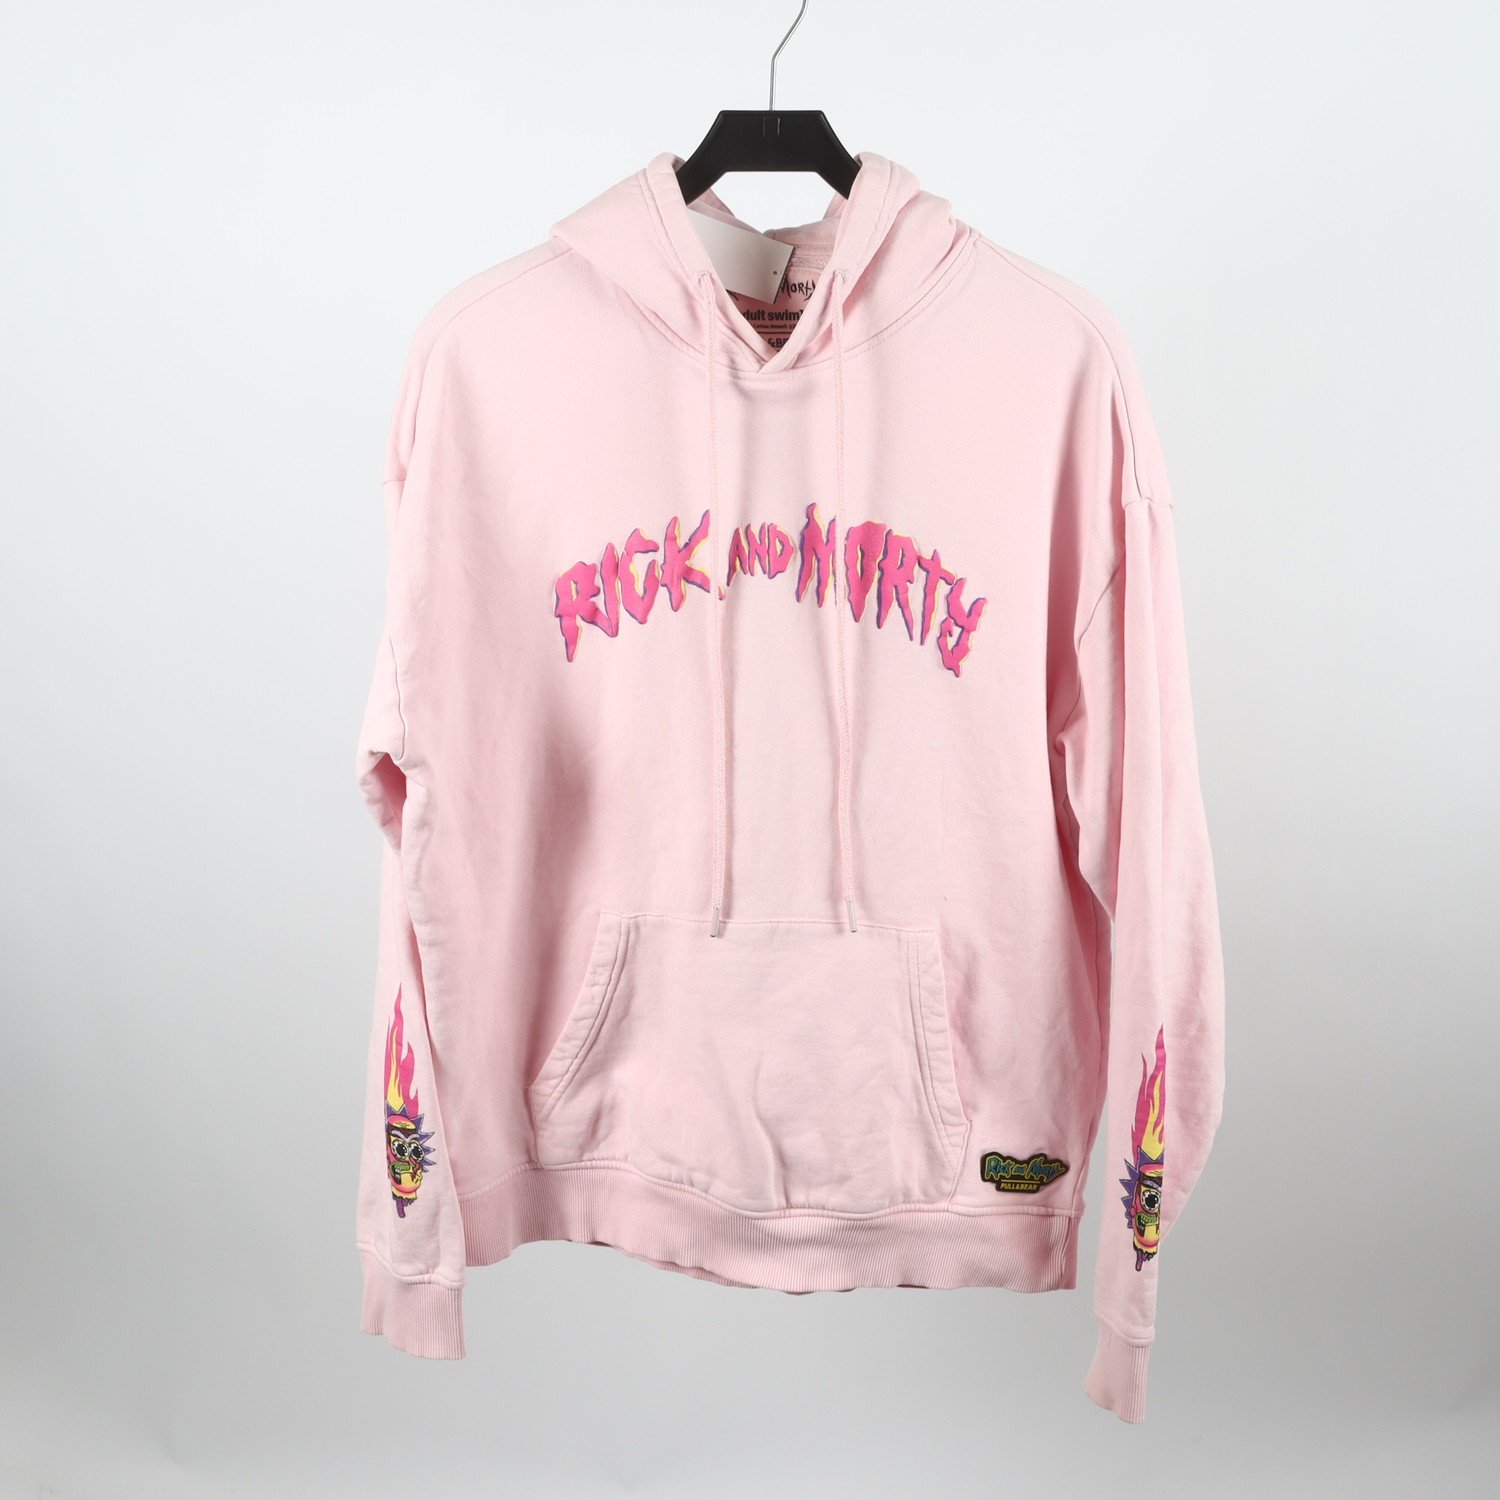 Hoodie, Pull&Bear, Rick And Morty, rosa, stl. L